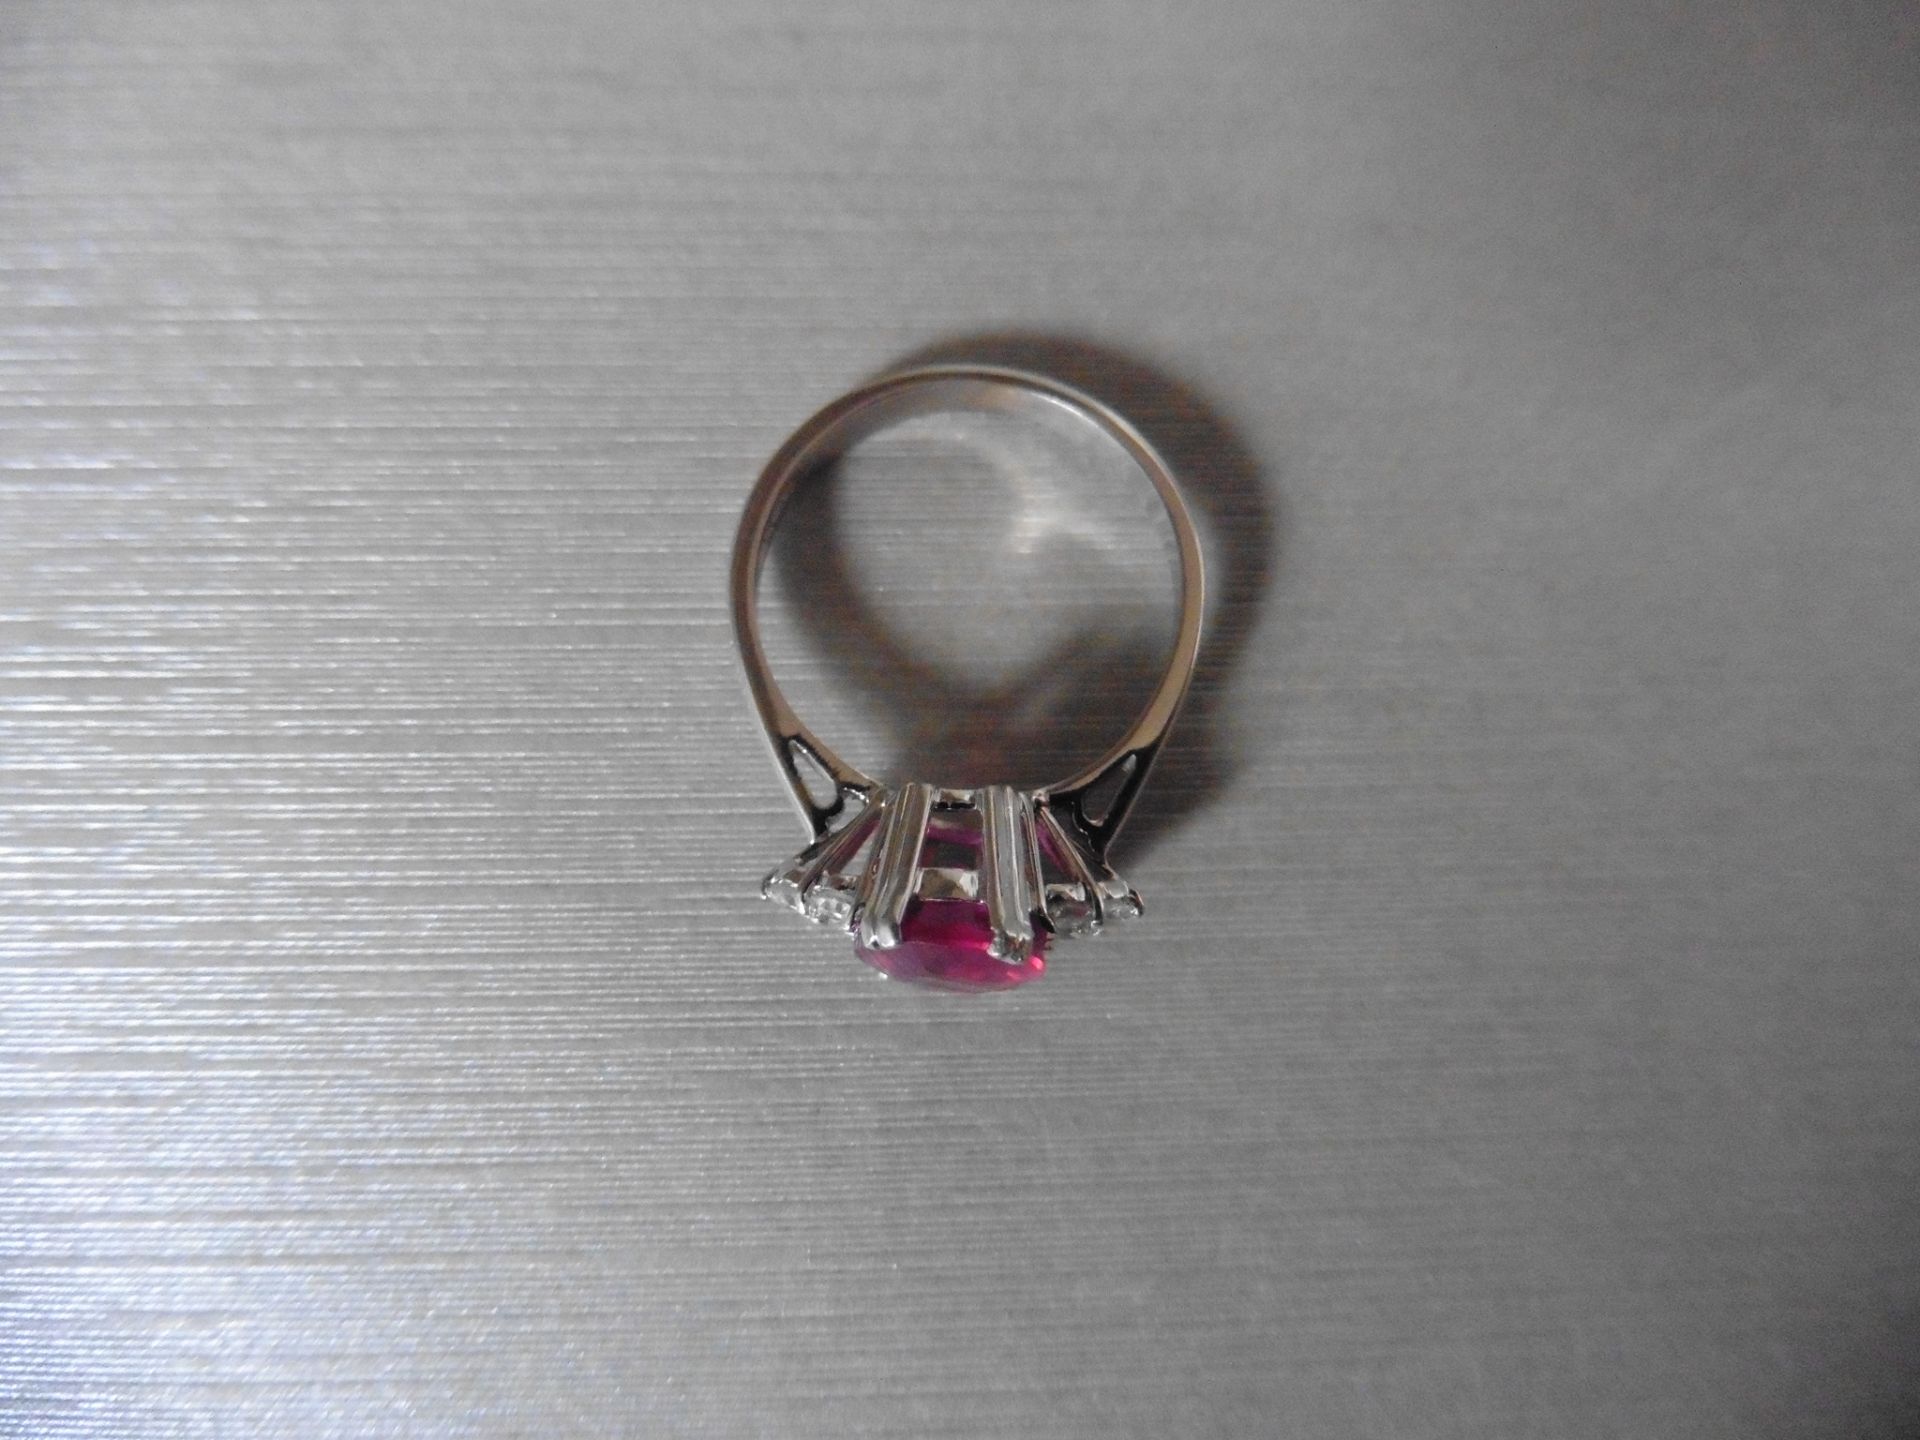 2.50ct 18ct white gold ruby and diamond dress ring set with an oval cut ( glass filled ) ruby - Image 2 of 3